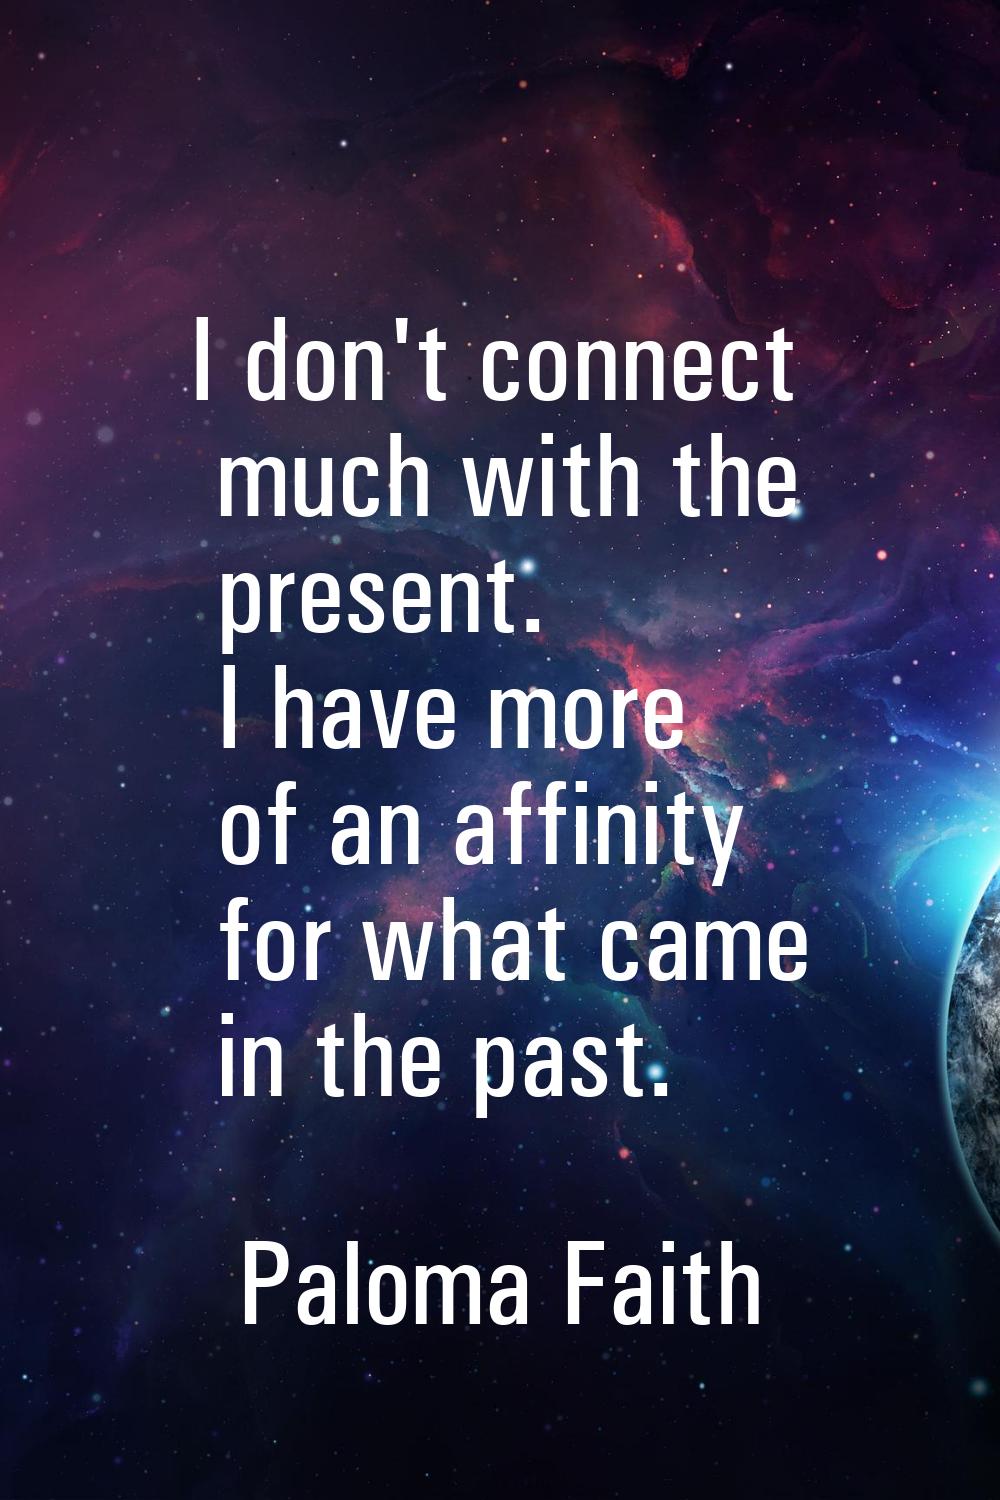 I don't connect much with the present. I have more of an affinity for what came in the past.